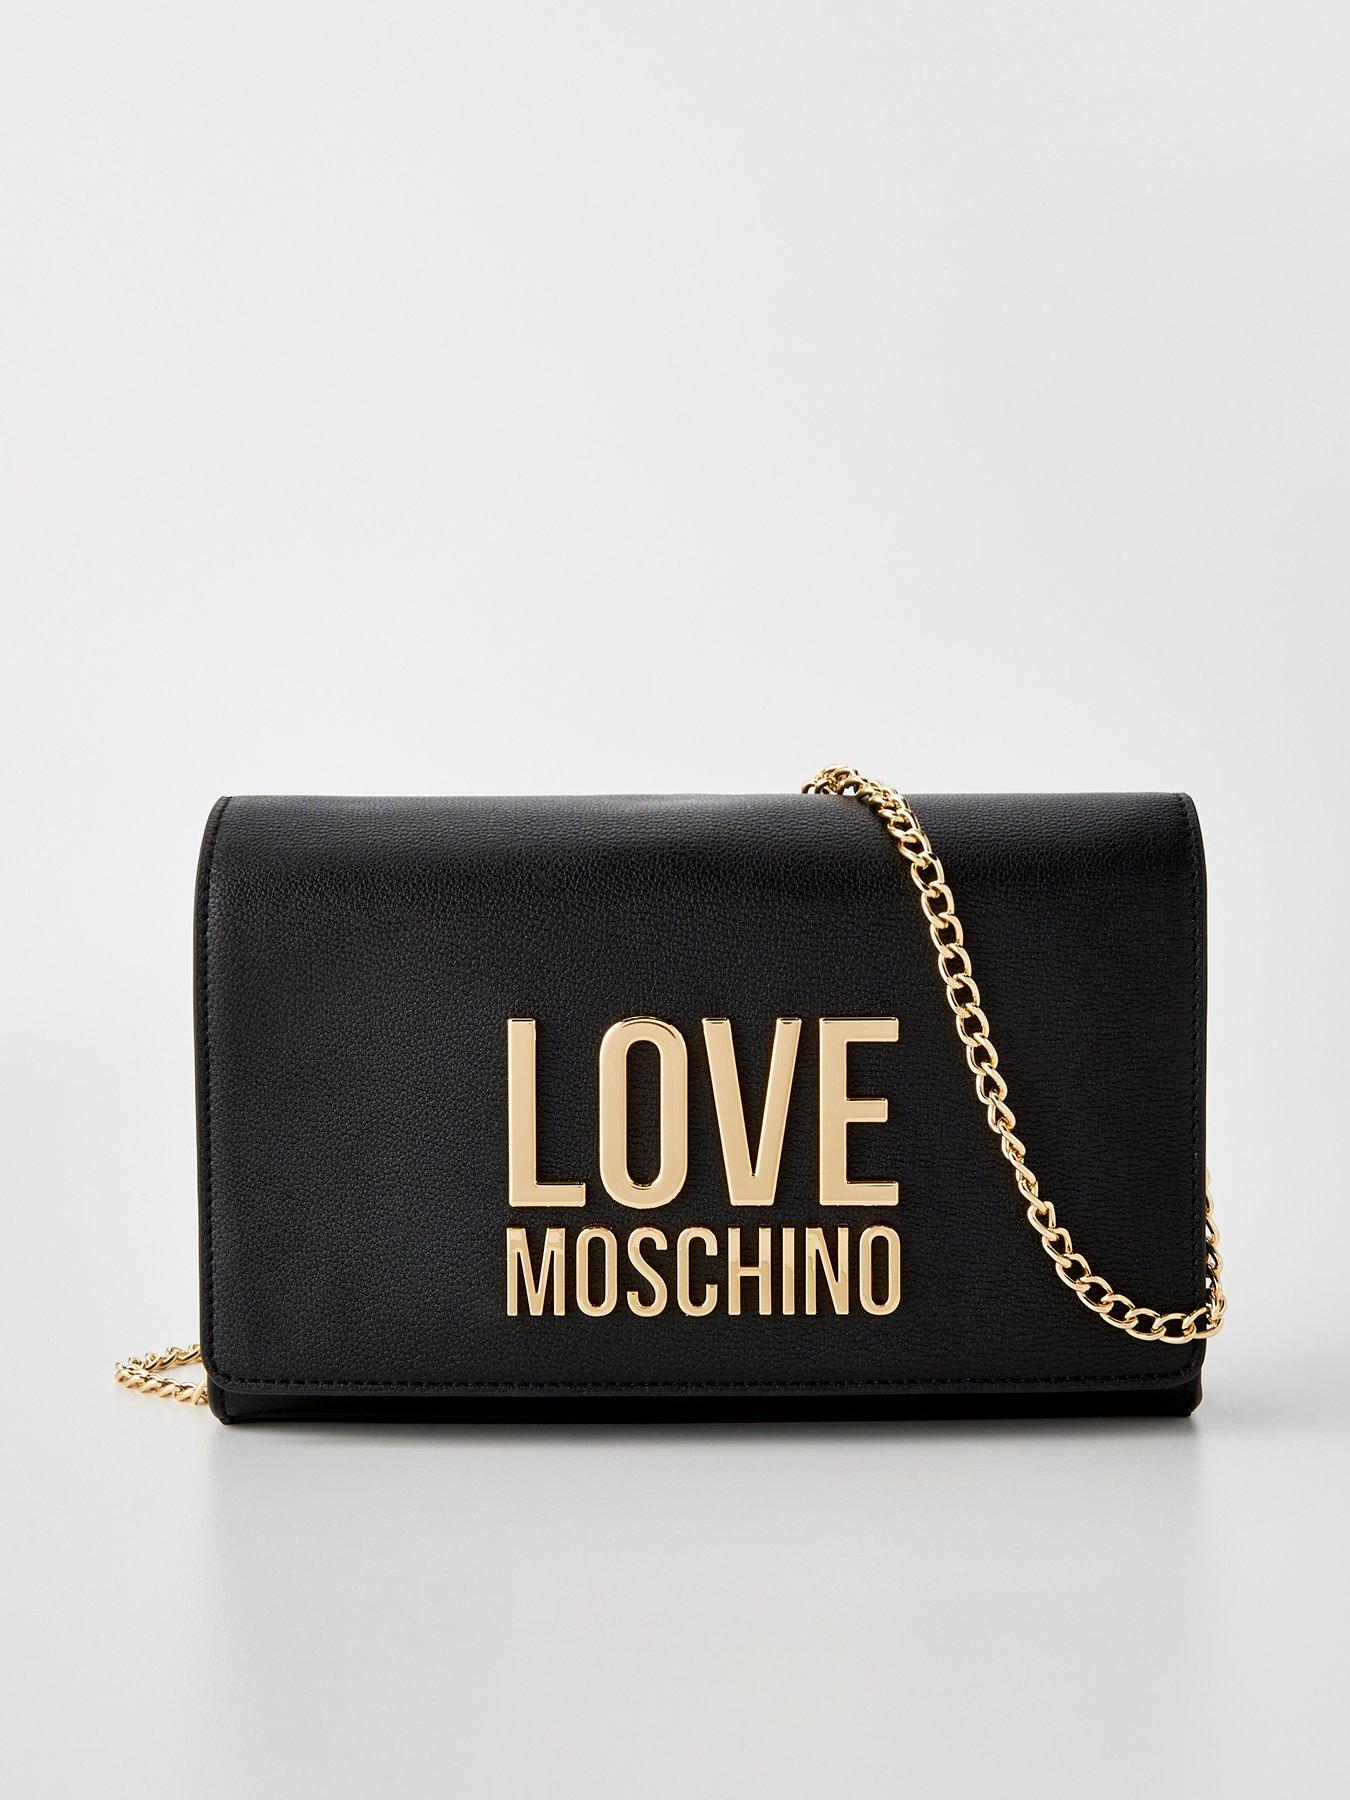 Authentic Moschino Quilted Black Calfskin Gold Chain Strap Purse